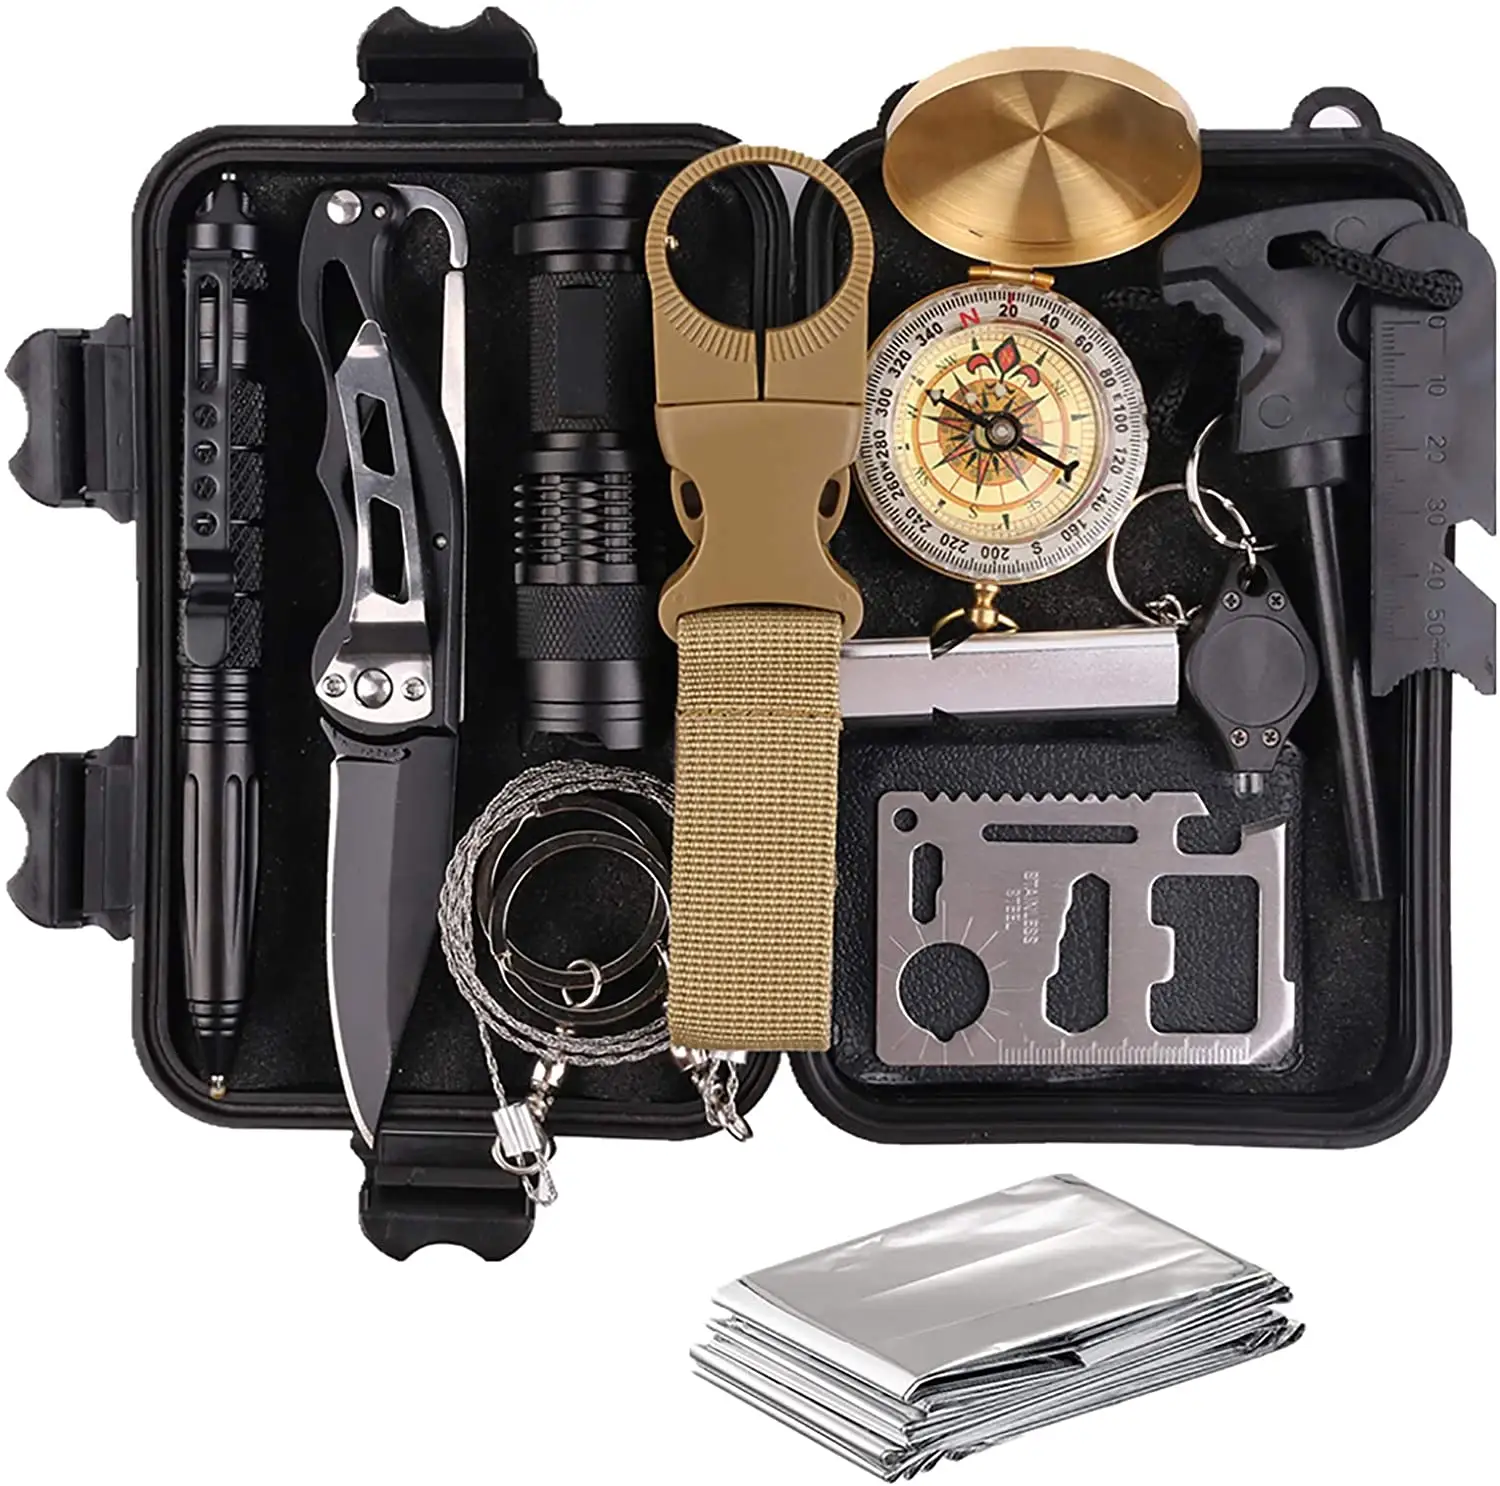 Survival Gear and Equipment 13 in 1 Cool Stuff Camping Survival Kit for camping ,fishing